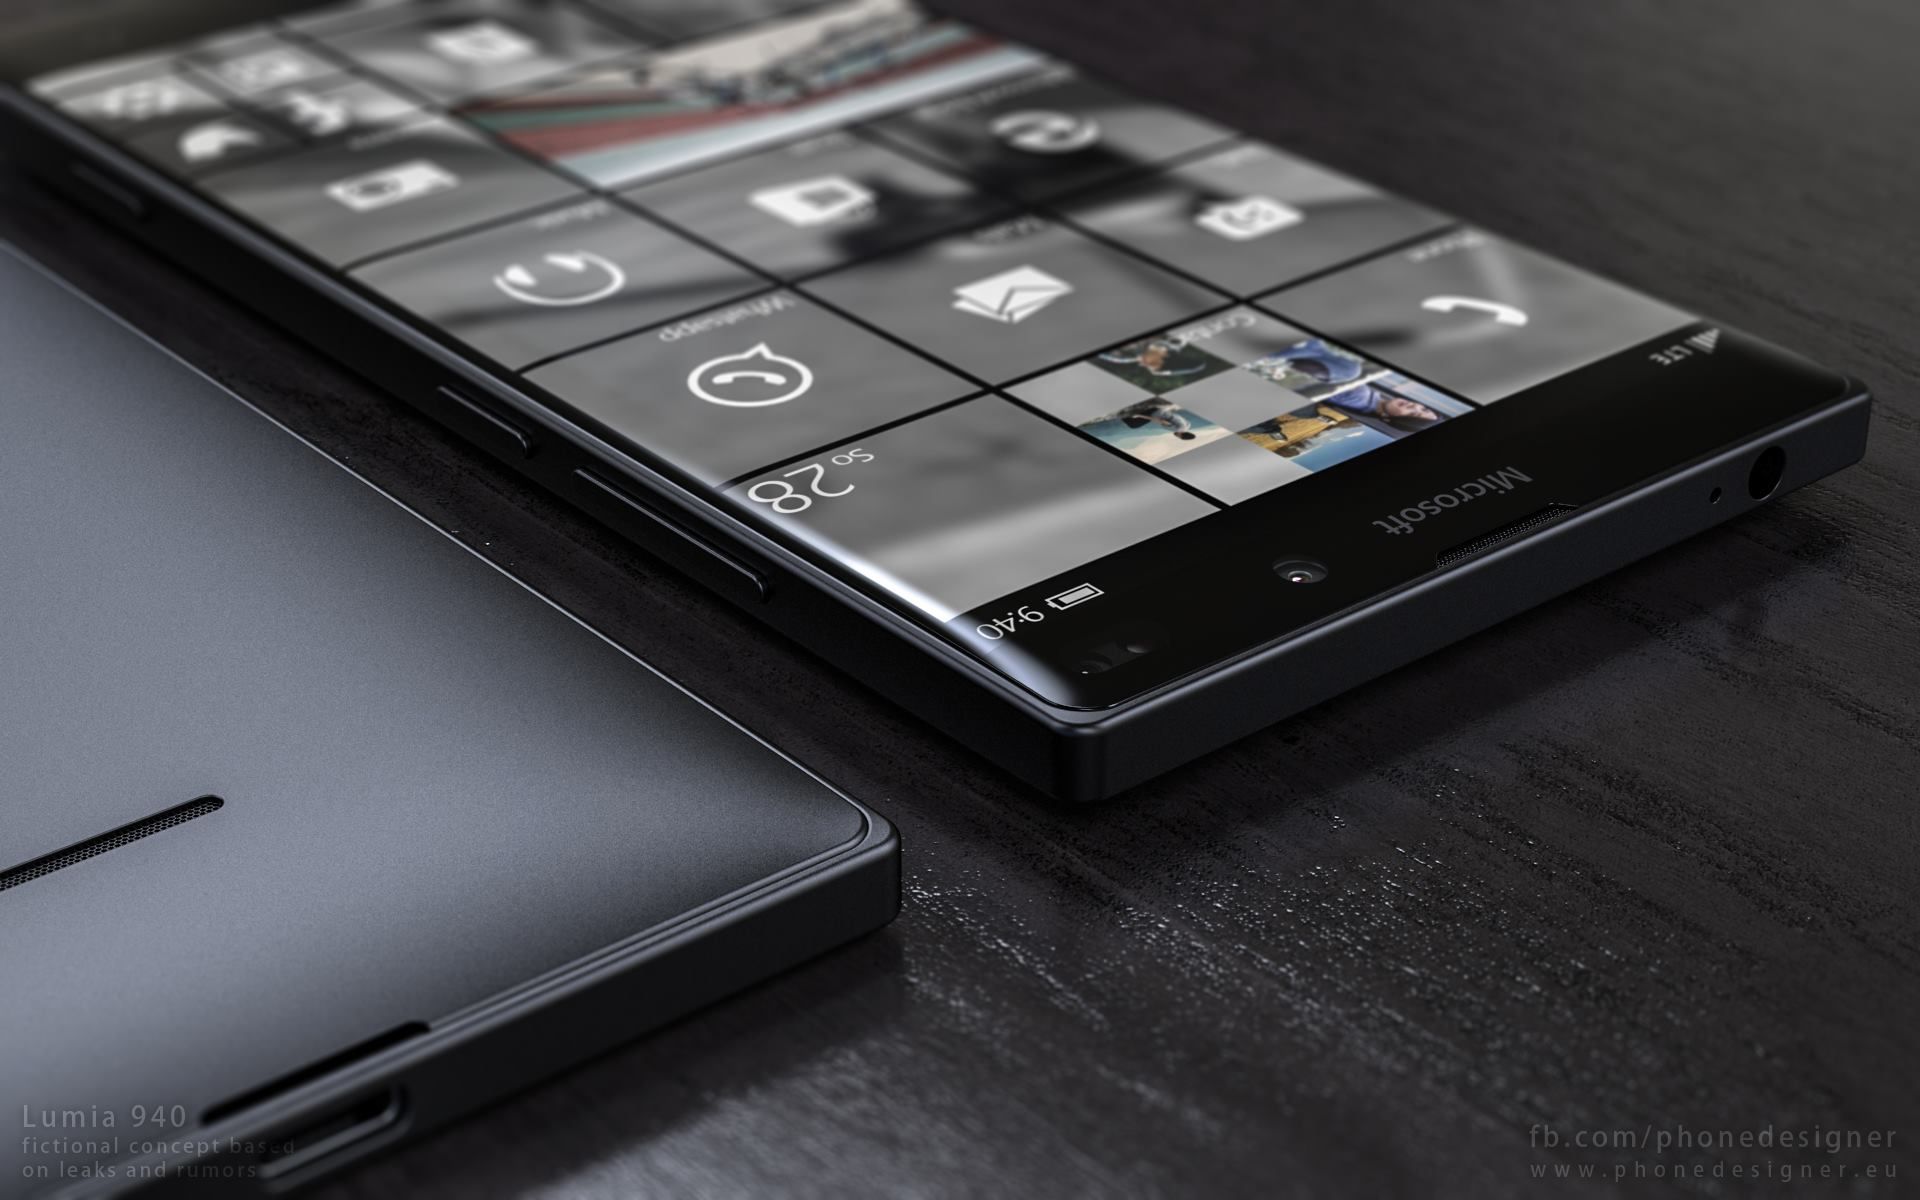 first new windows 10 phones tipped to be lumia 950 and 950 xl specifications leaked image 1